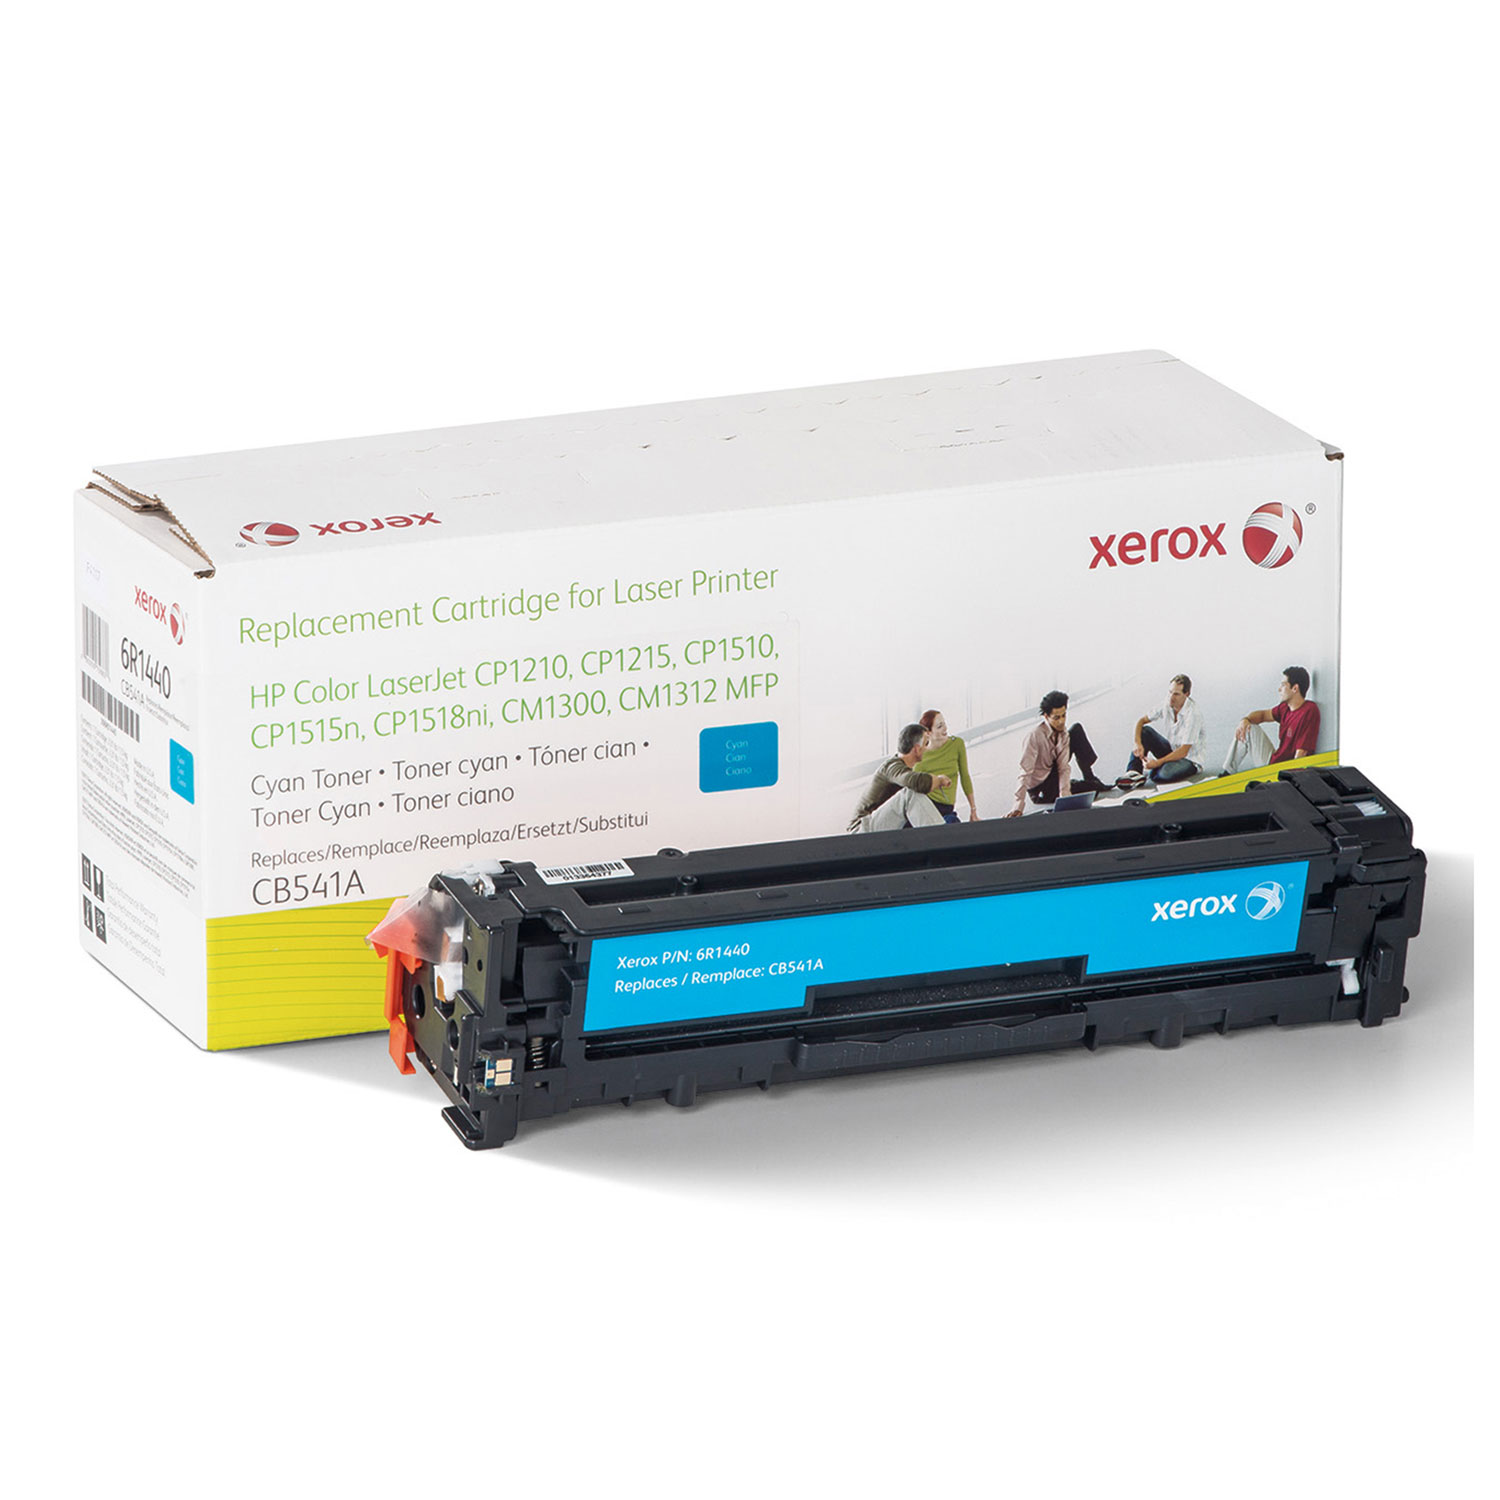  Xerox 006R01440 006R01440 Replacement Toner for CB541A (125A), 1400 Page Yield, Cyan (XER006R01440) 